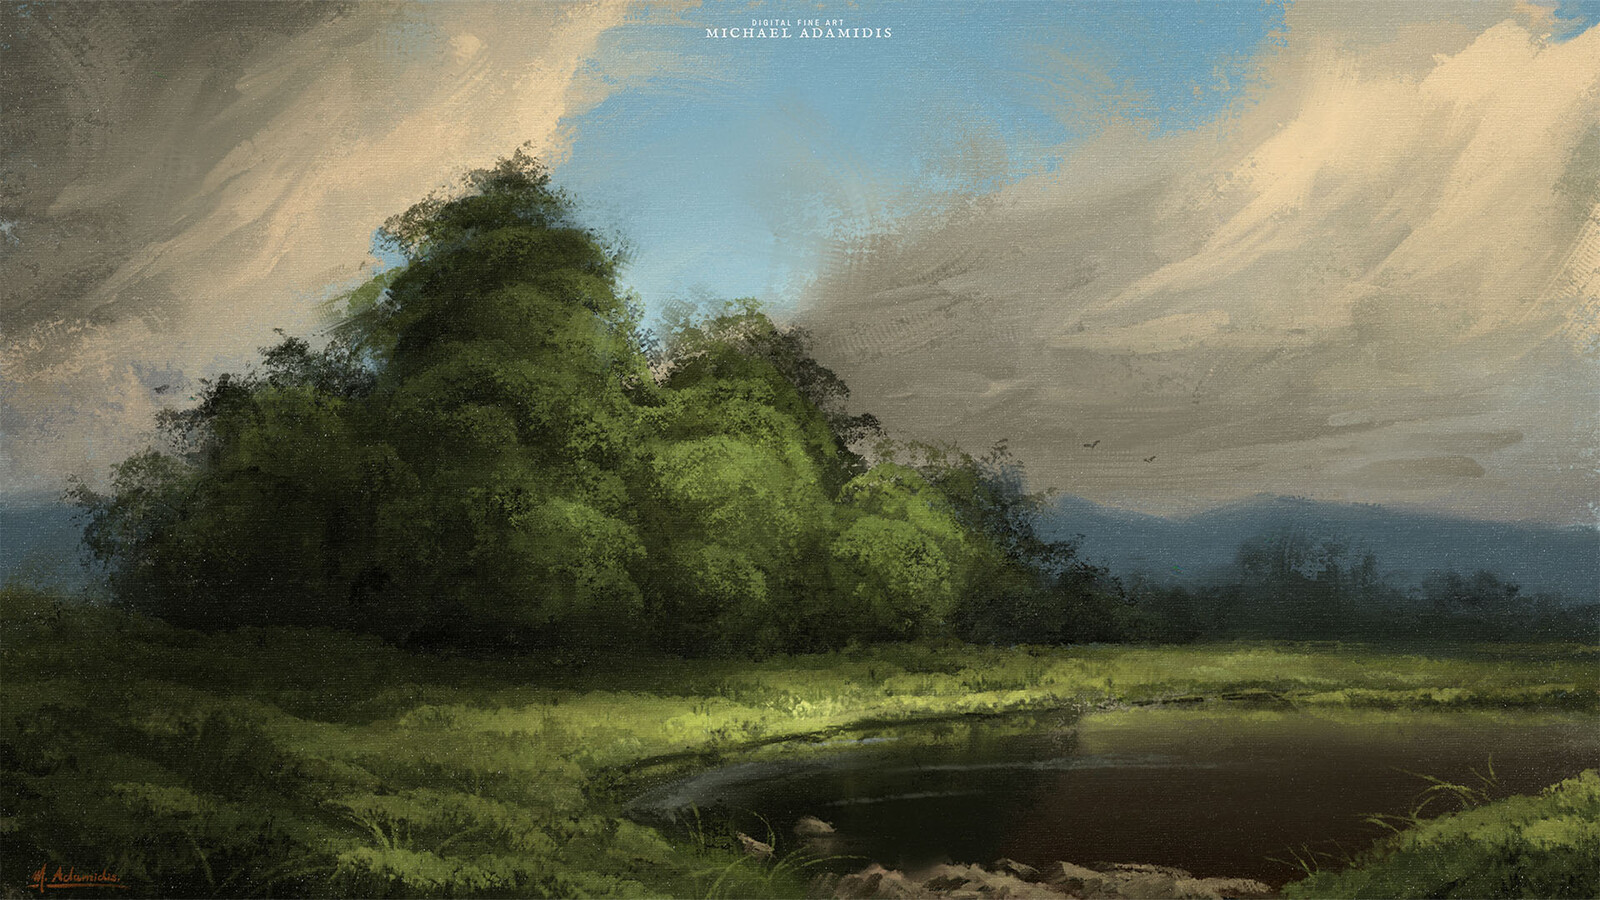 Digital Landscape Painting - Old Scenery